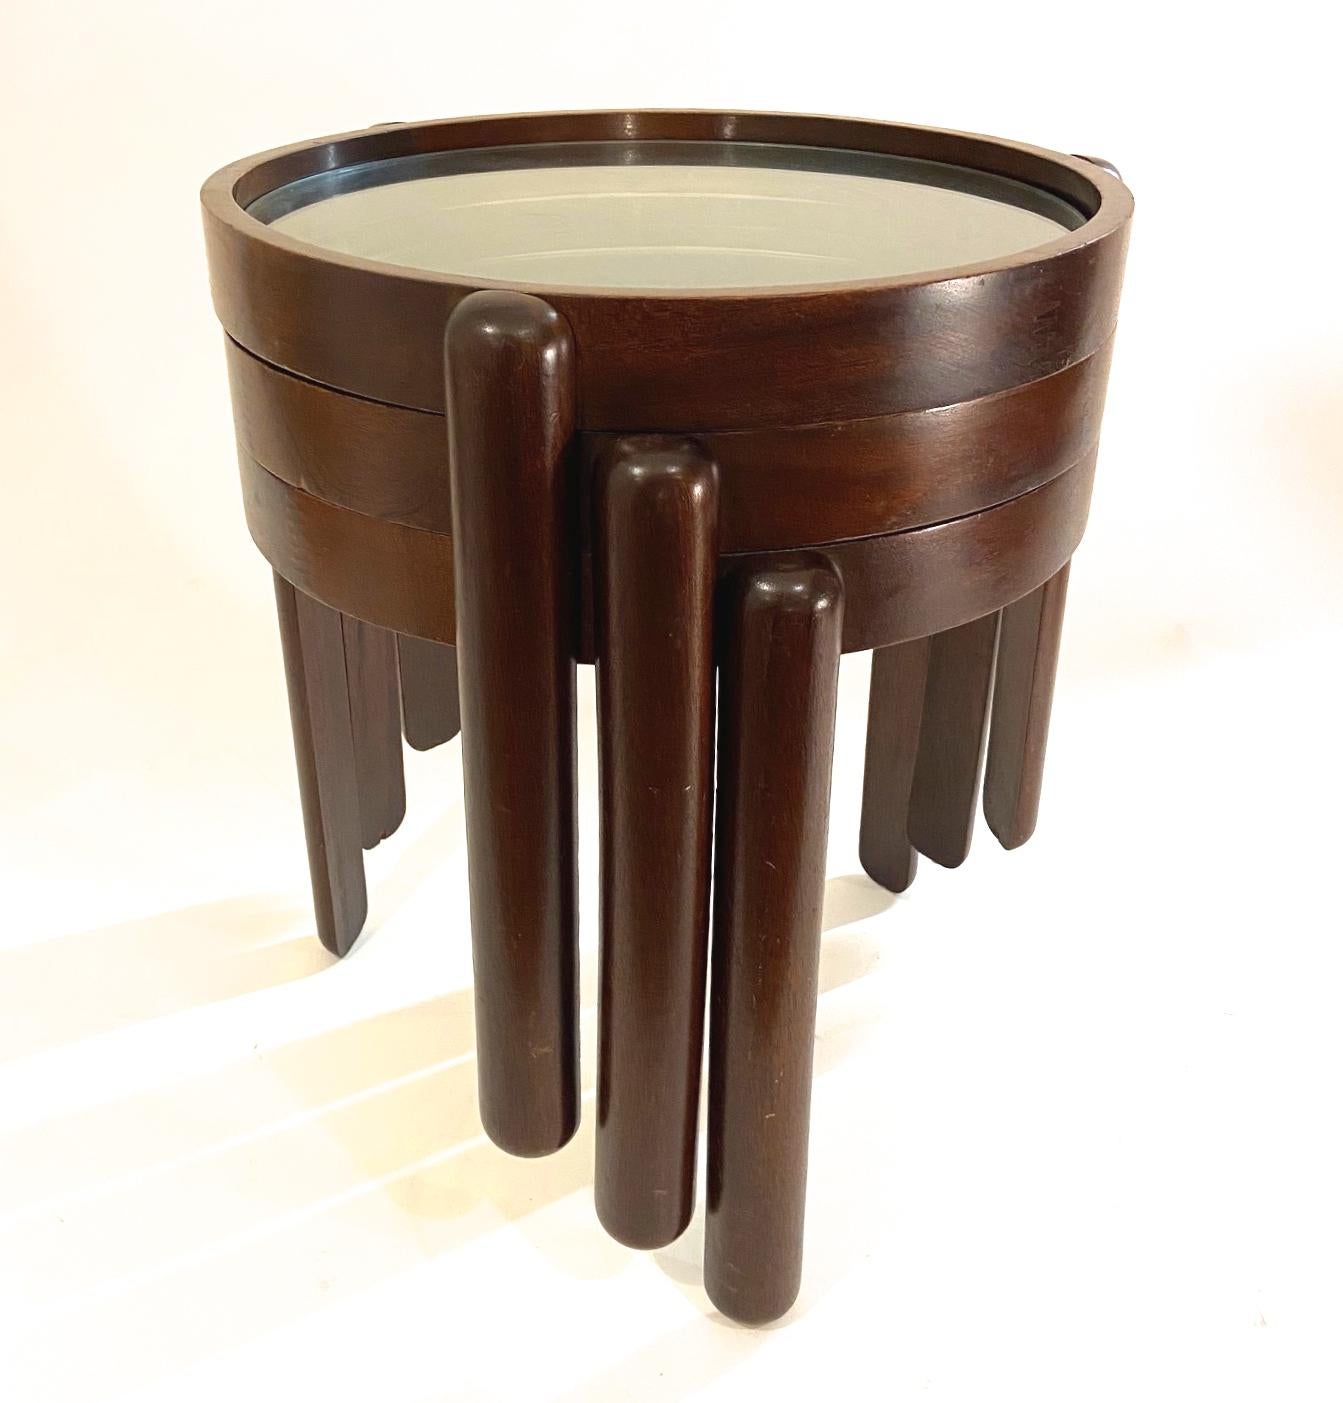 A set of three Italian nesting tables. Mahogany frame and glass tops. Excellent condition, 1960s edition.